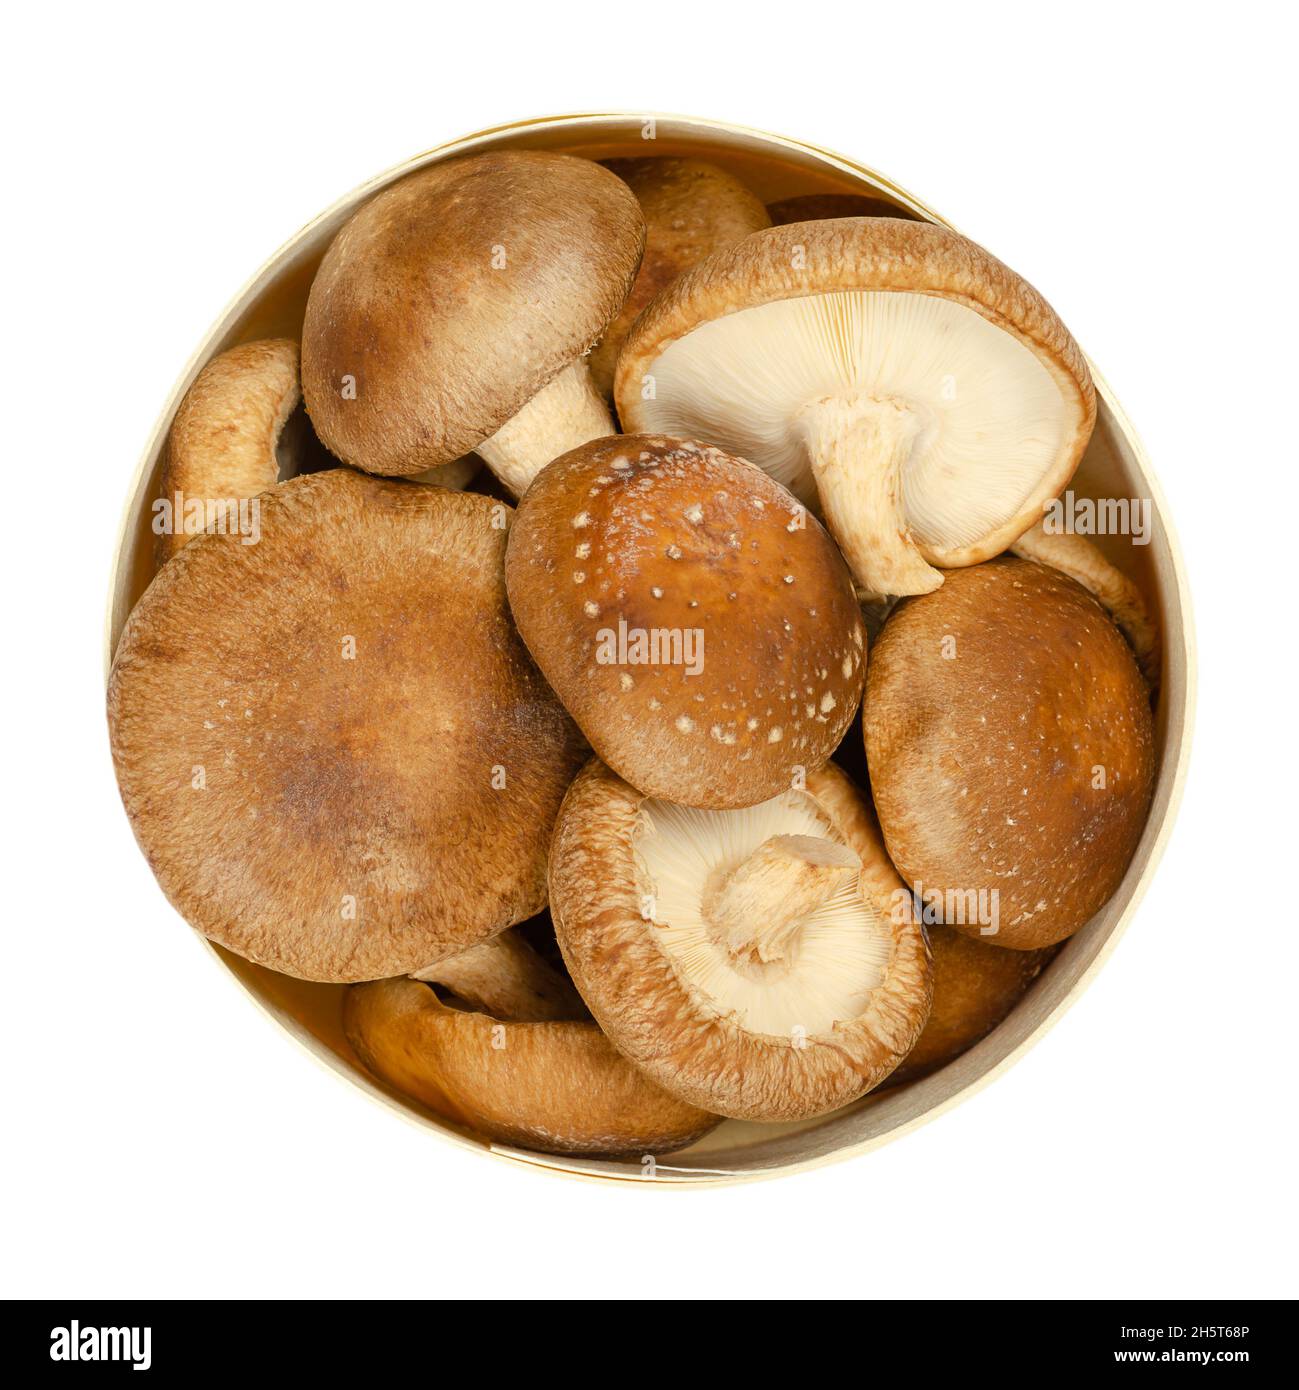 Fresh whole shiitake mushrooms, in a round balsa wood box. Lentinula edodes, edible mushrooms, native to East Asia, also used in traditional medicine. Stock Photo